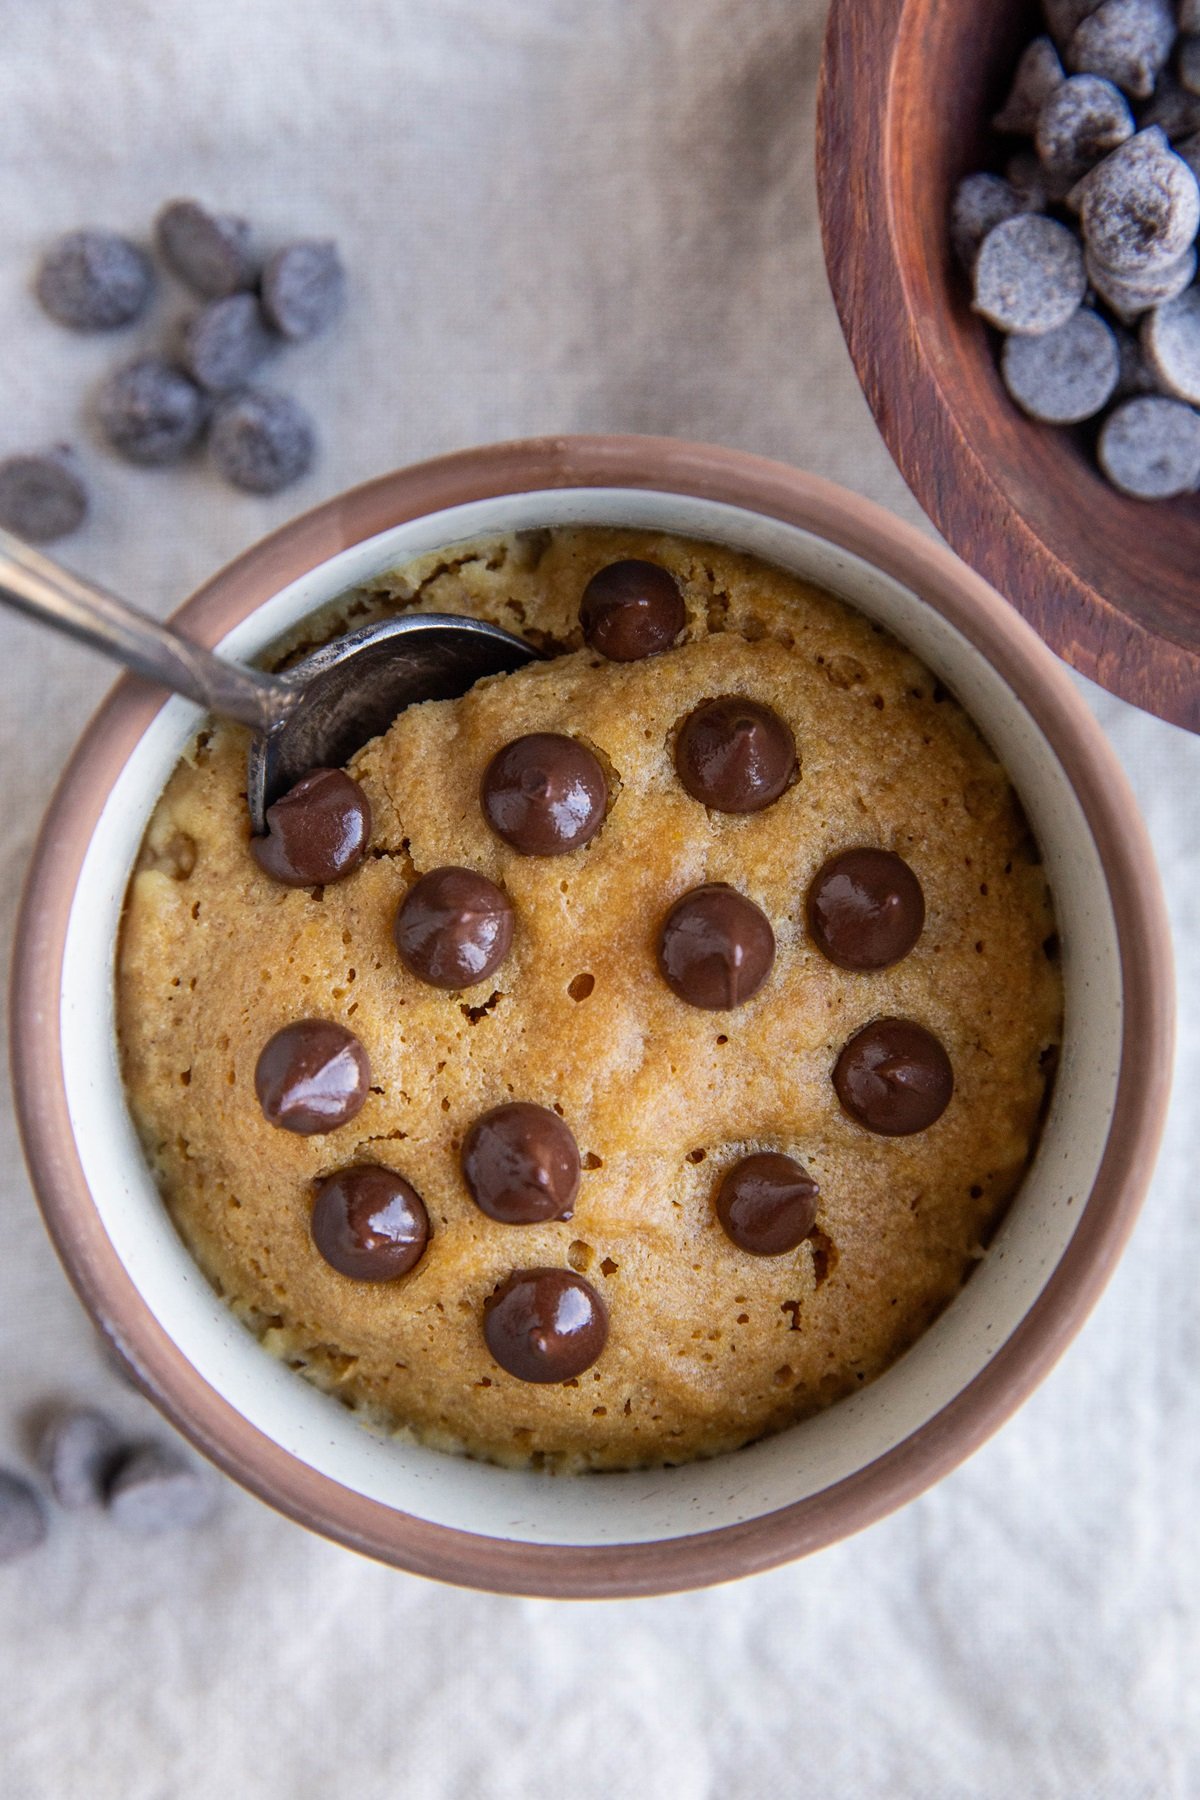 Peanut butter cookie in a mug with chocolate chips on top and a spoon dug in, ready to eat.